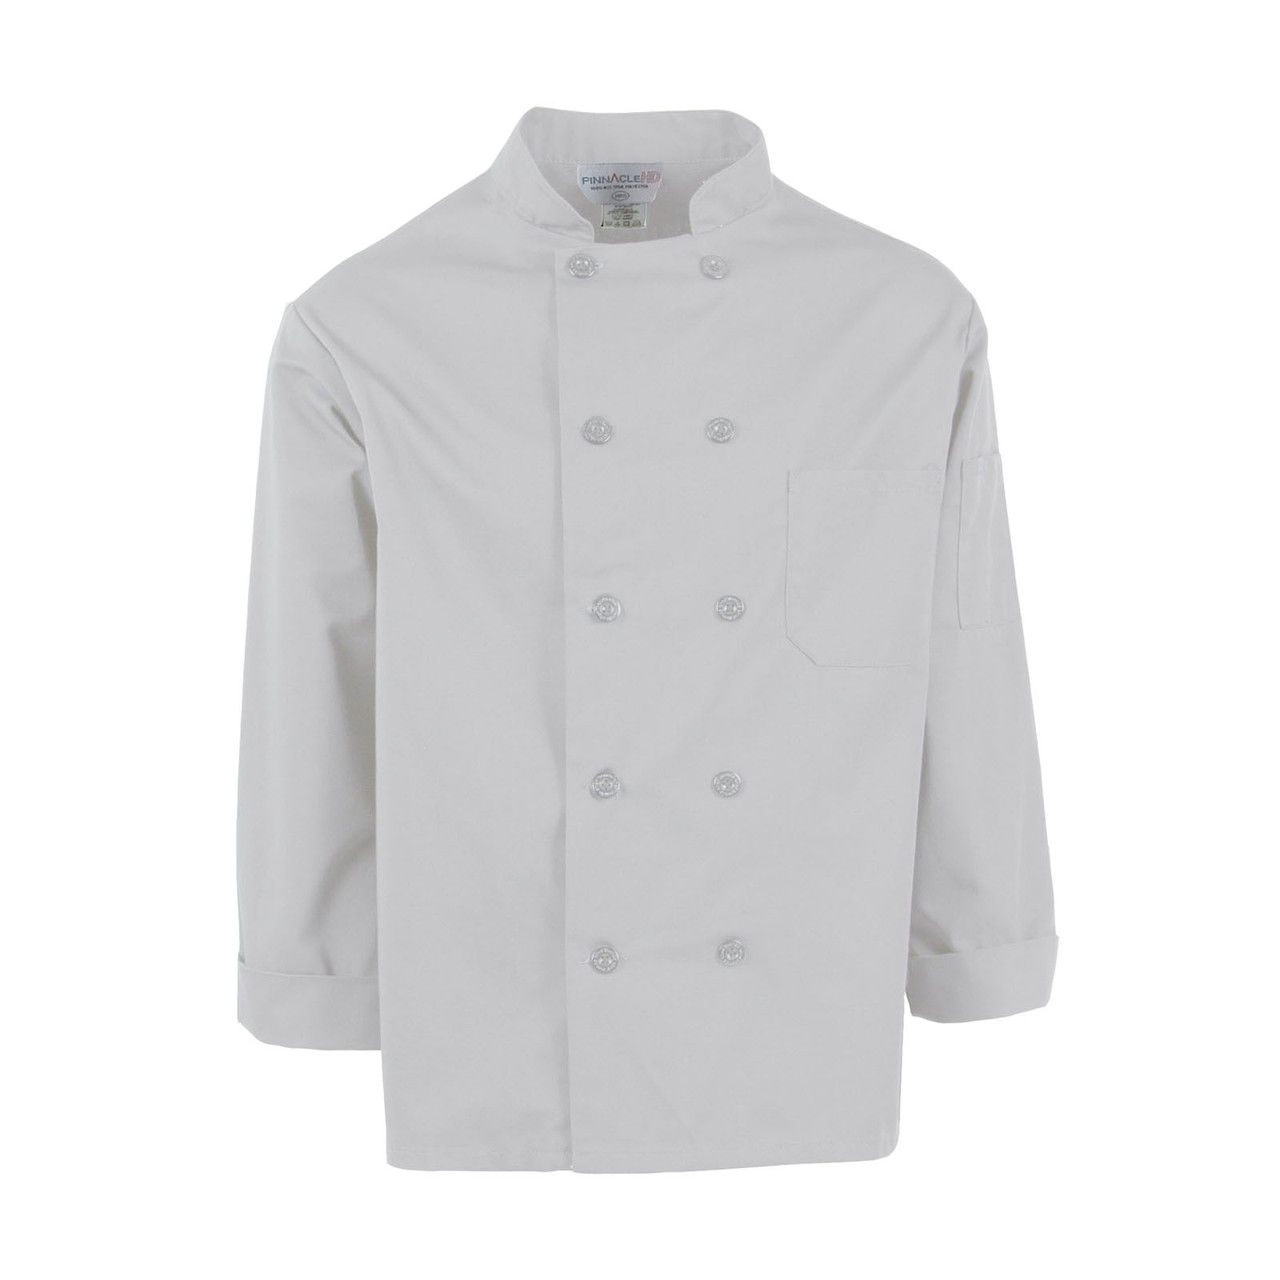 Does the chef coat with pinnacle buttons come in different colors?